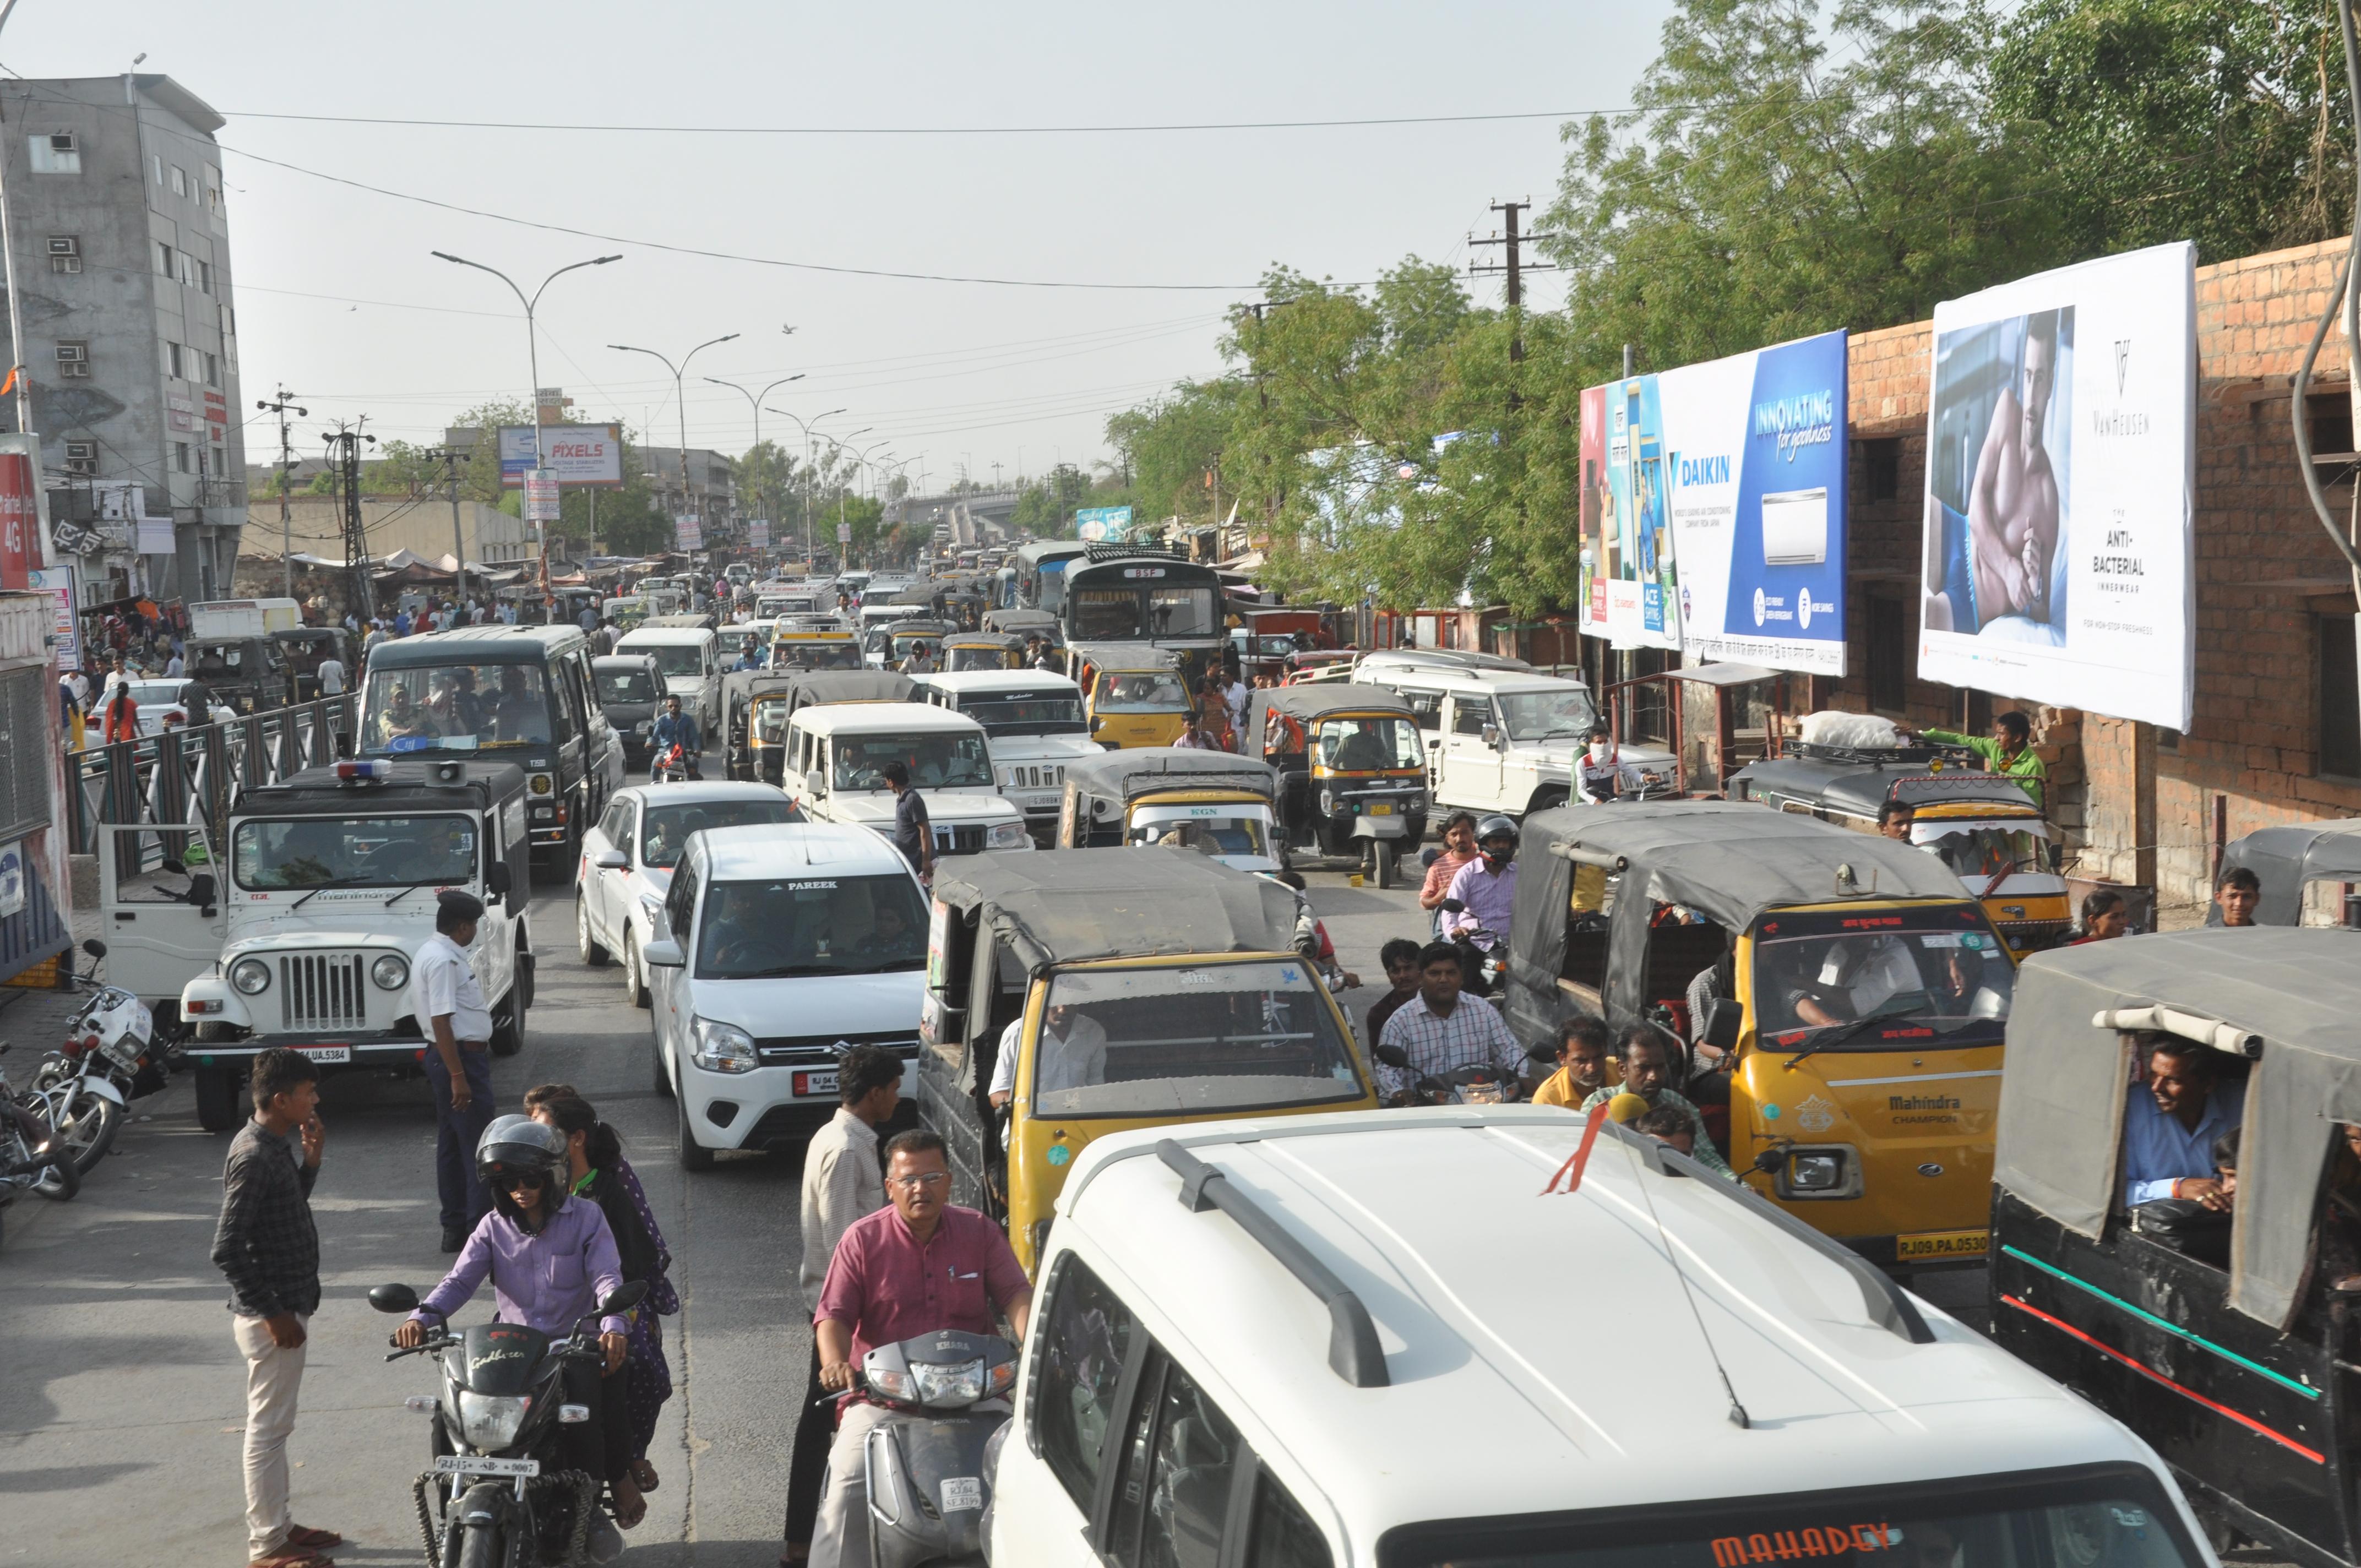 Disrupted city traffic system, long lines of vehicles engaged